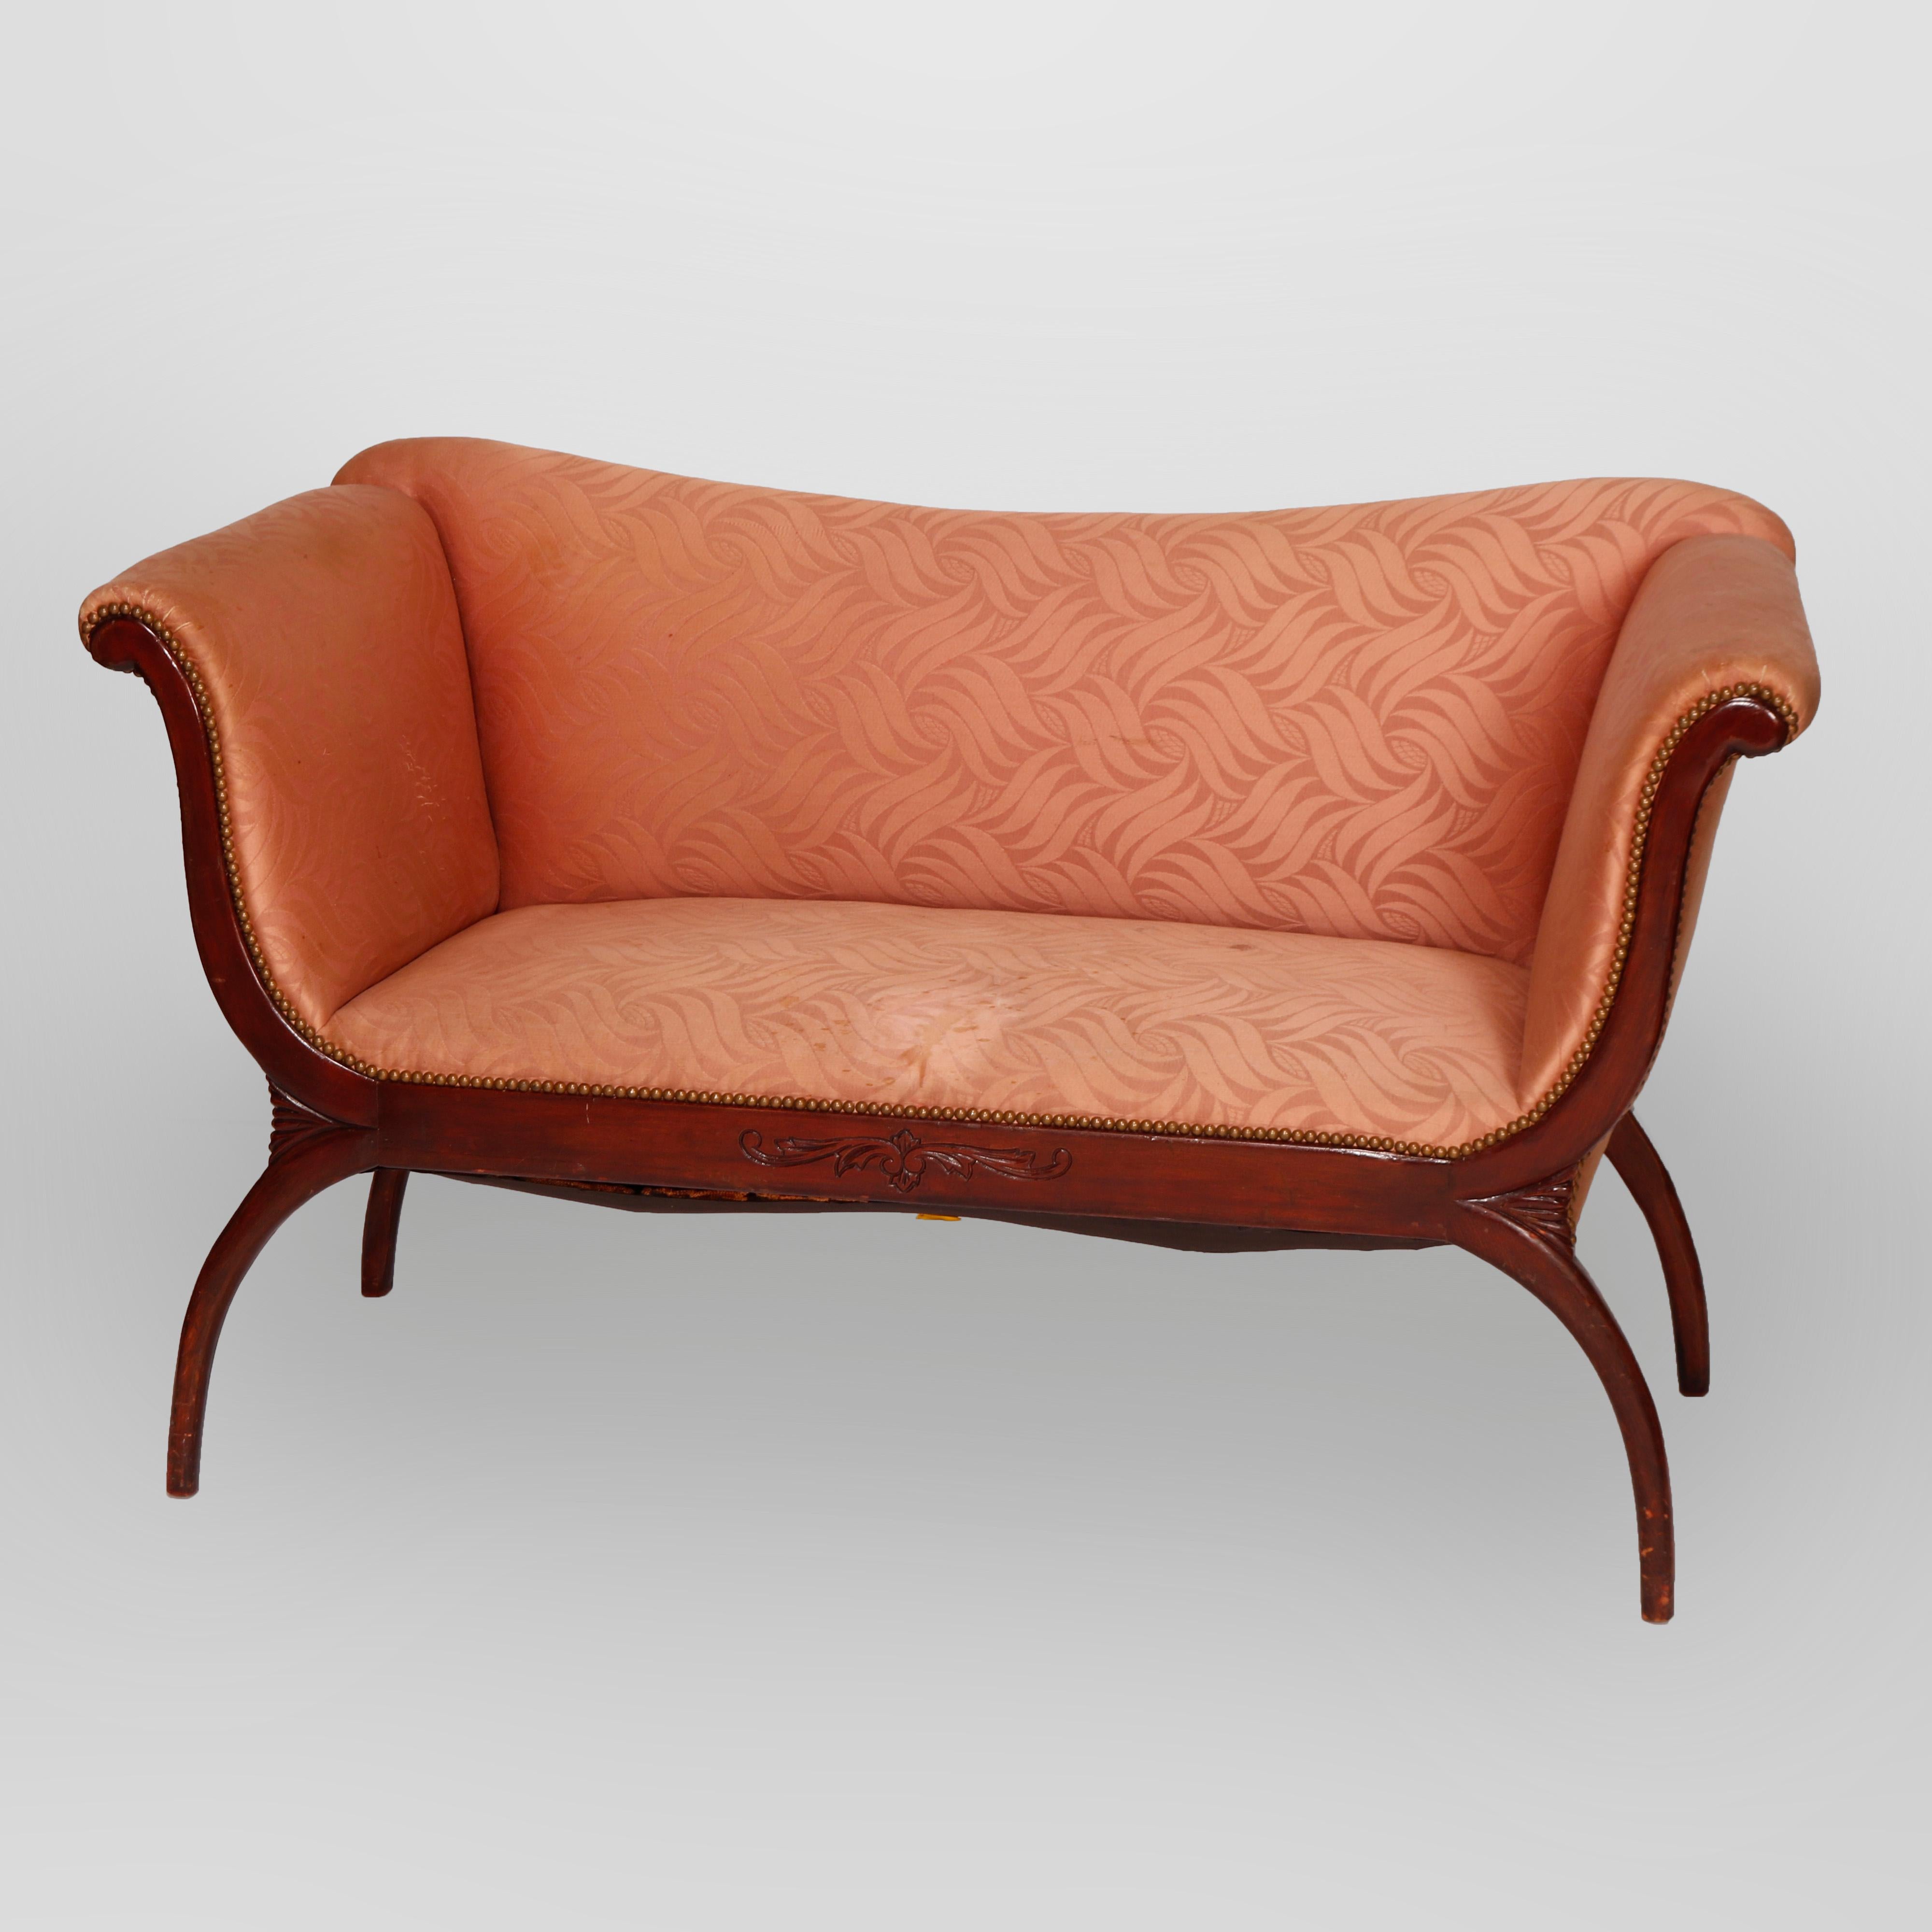 An antique classical Continental upholstered settee offers mahogany frame with scroll form arms, skirt with carved floral reserve, and raised on splayed legs, c1920

Measures- 35.5'' H x 60'' W x 26'' D; SH: 19.5''

Catalogue Note: Ask about